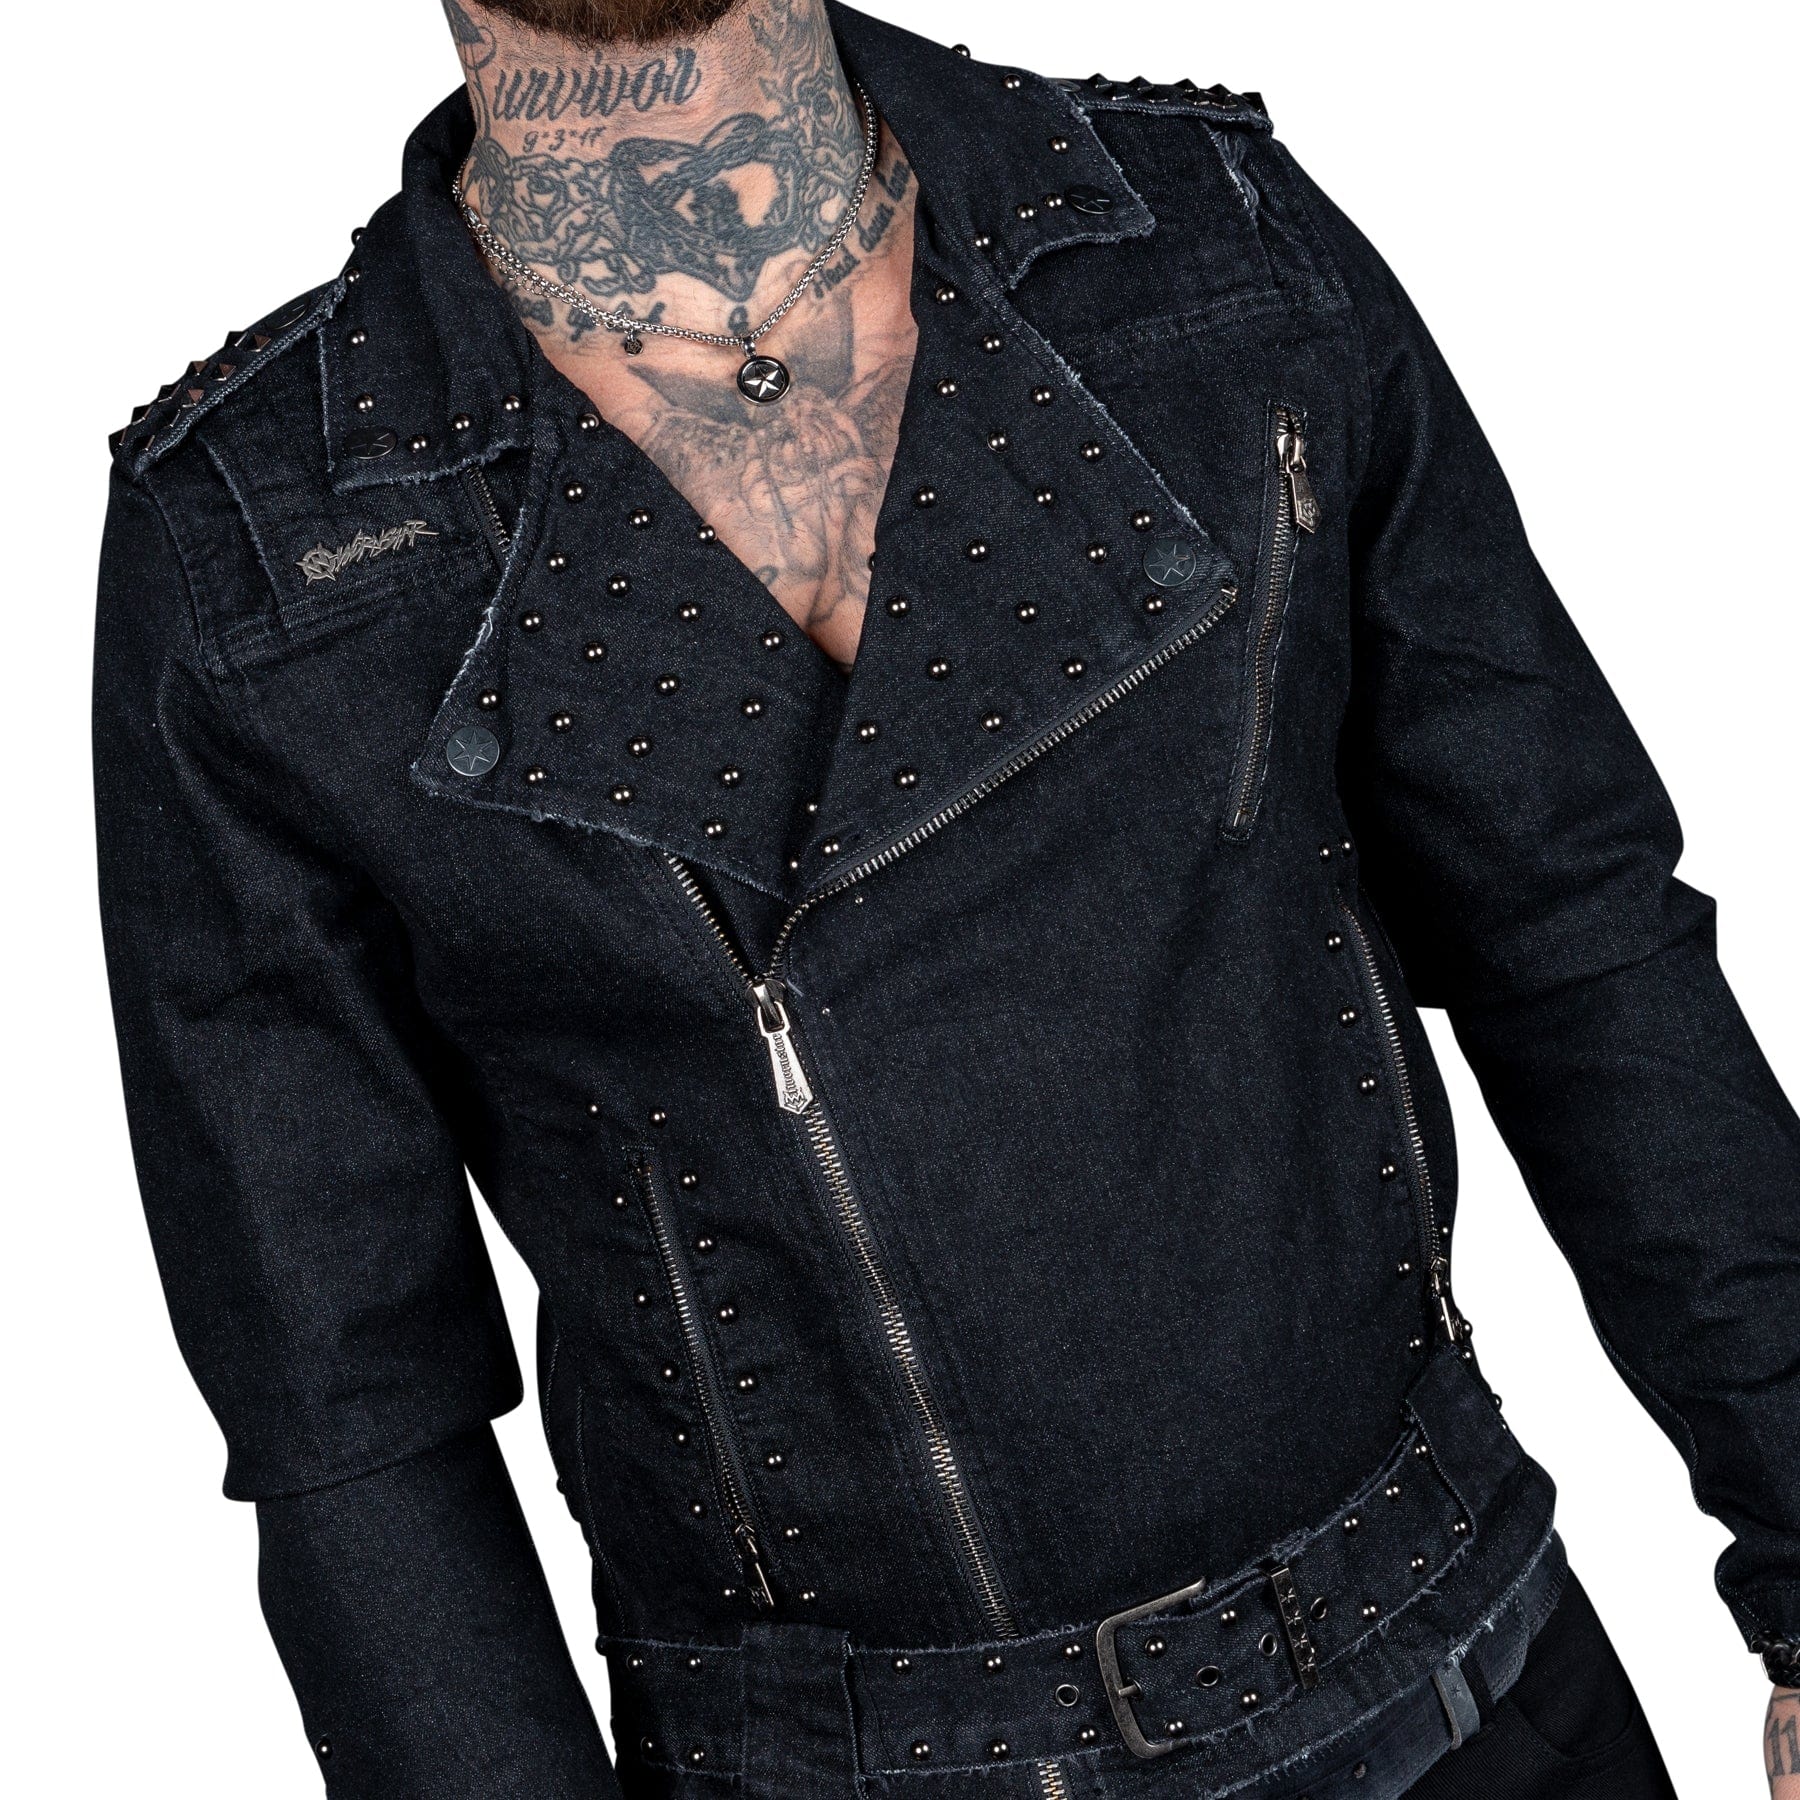 Venom Cut off vest and leather jacket